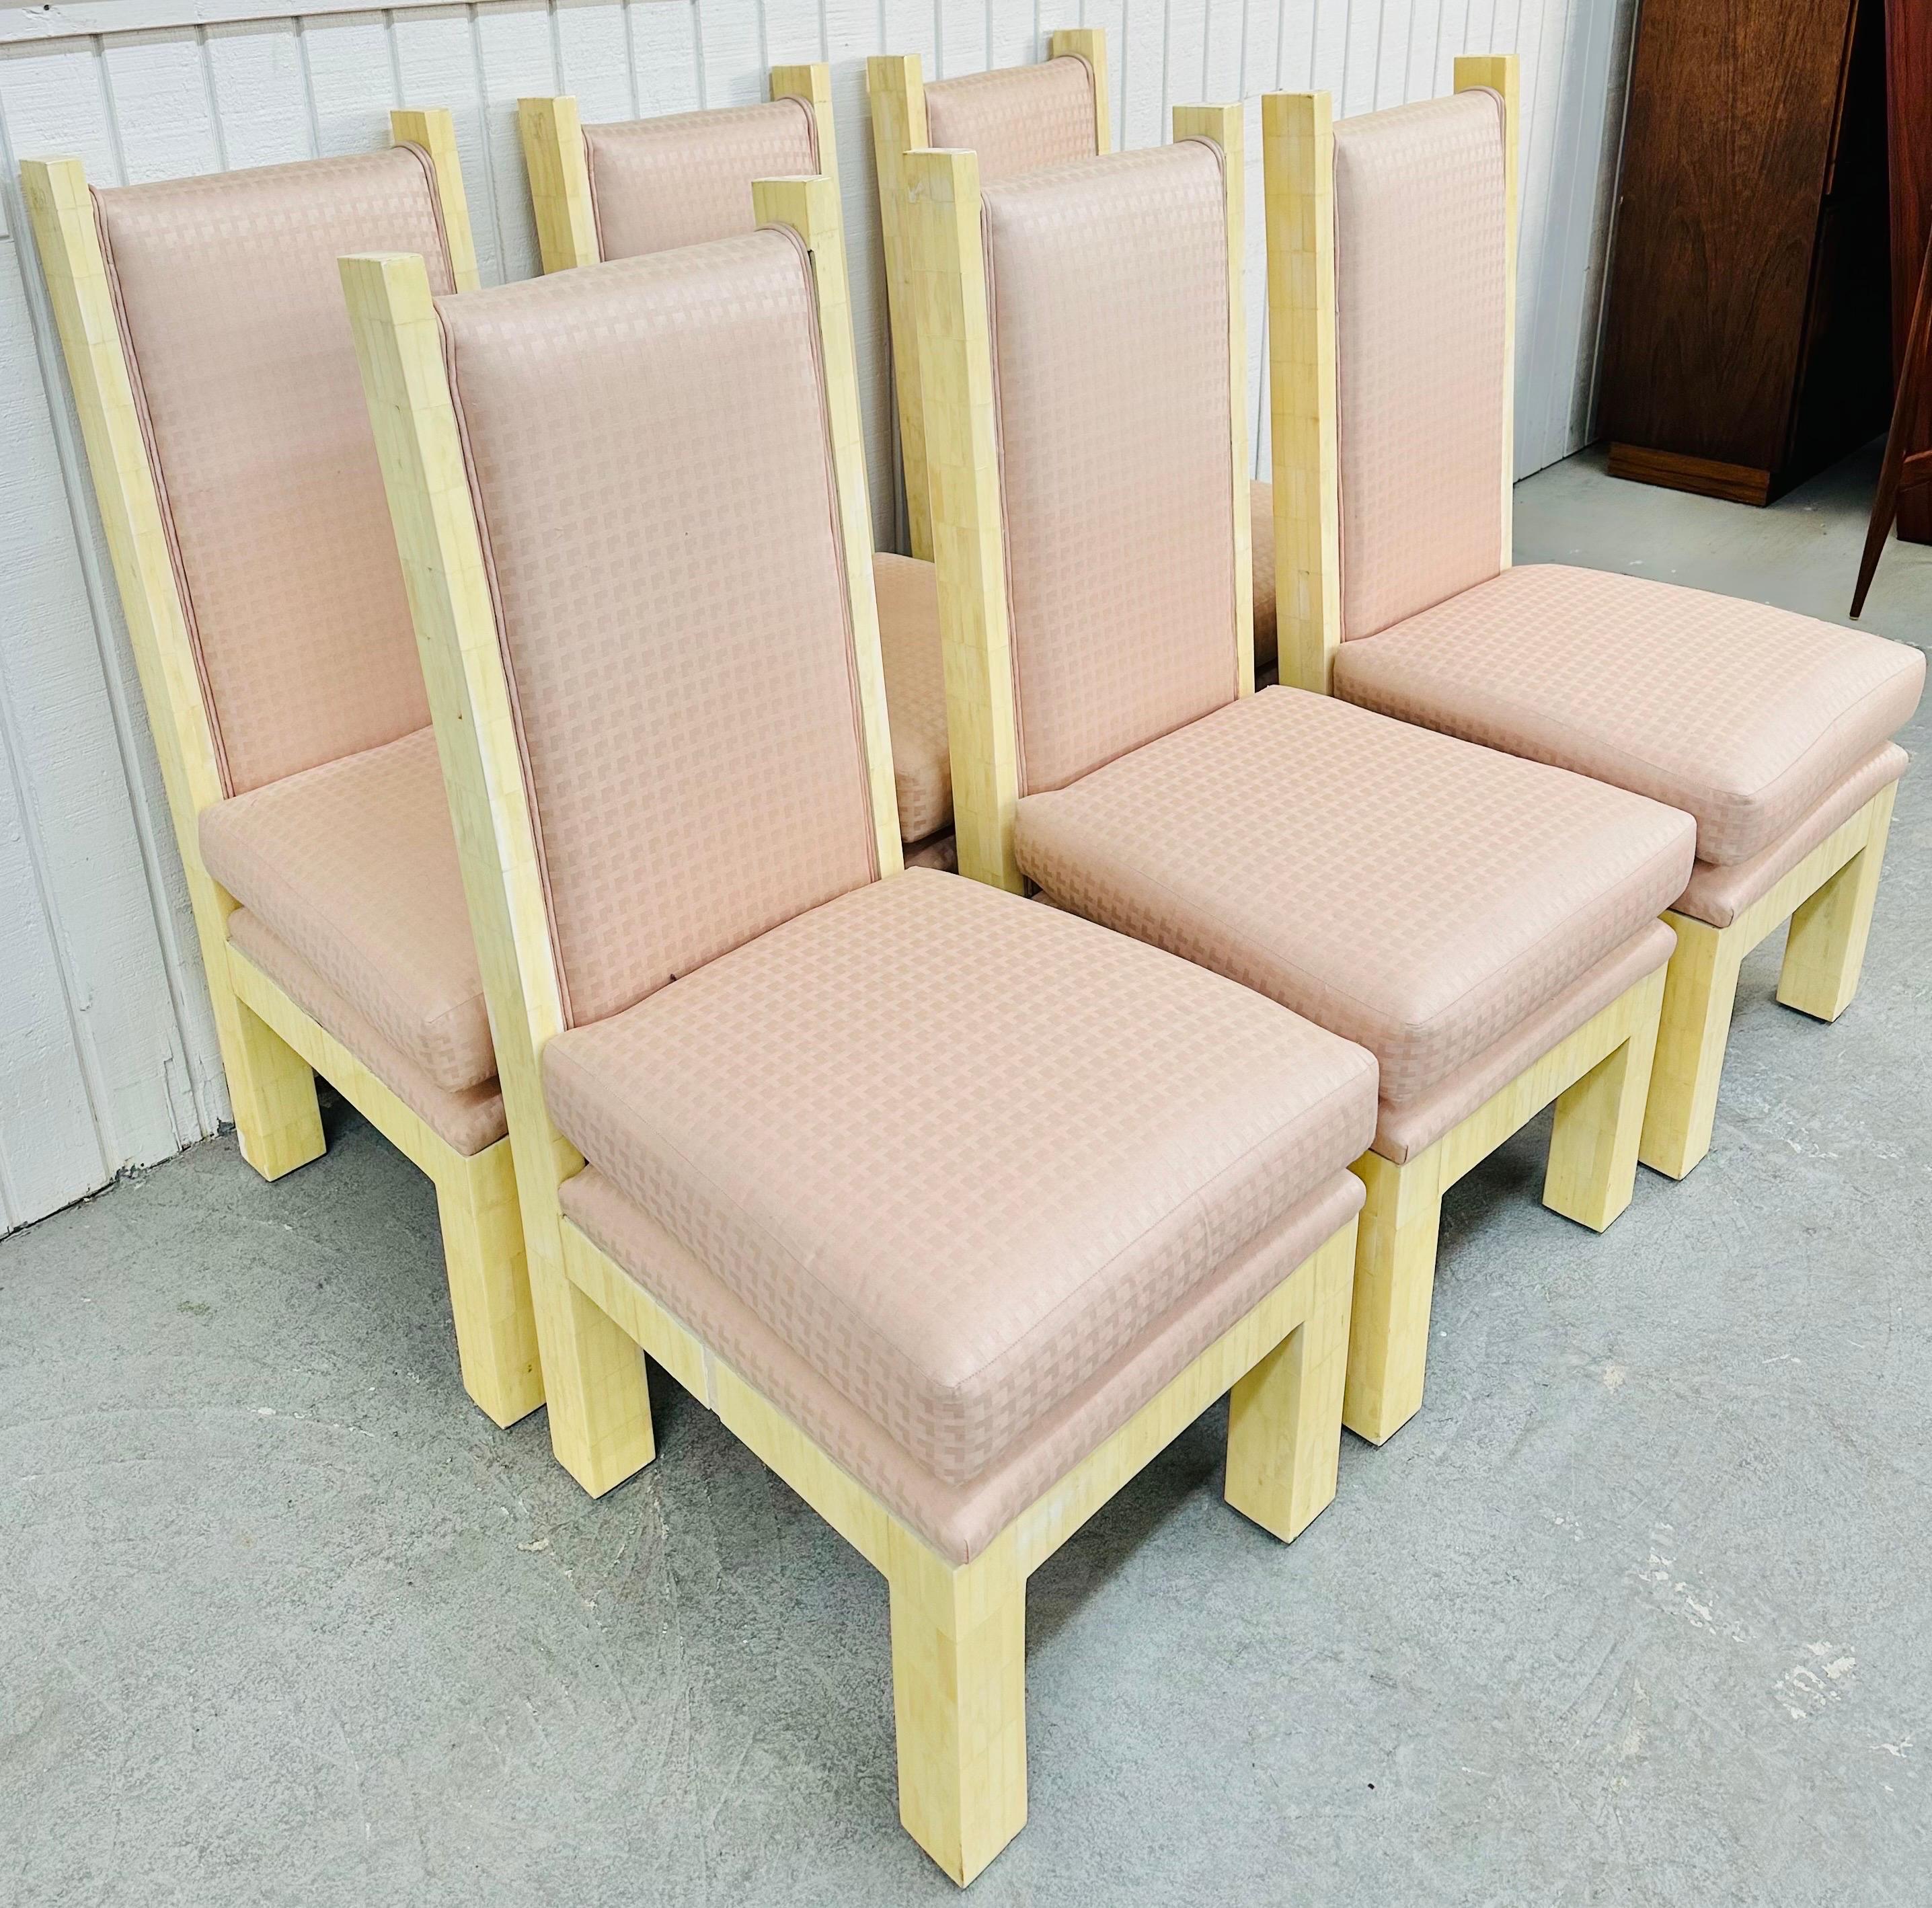 Post-Modern Vintage Modern Enrique Garcel Tessellated Dining Chairs - Set of 6 For Sale